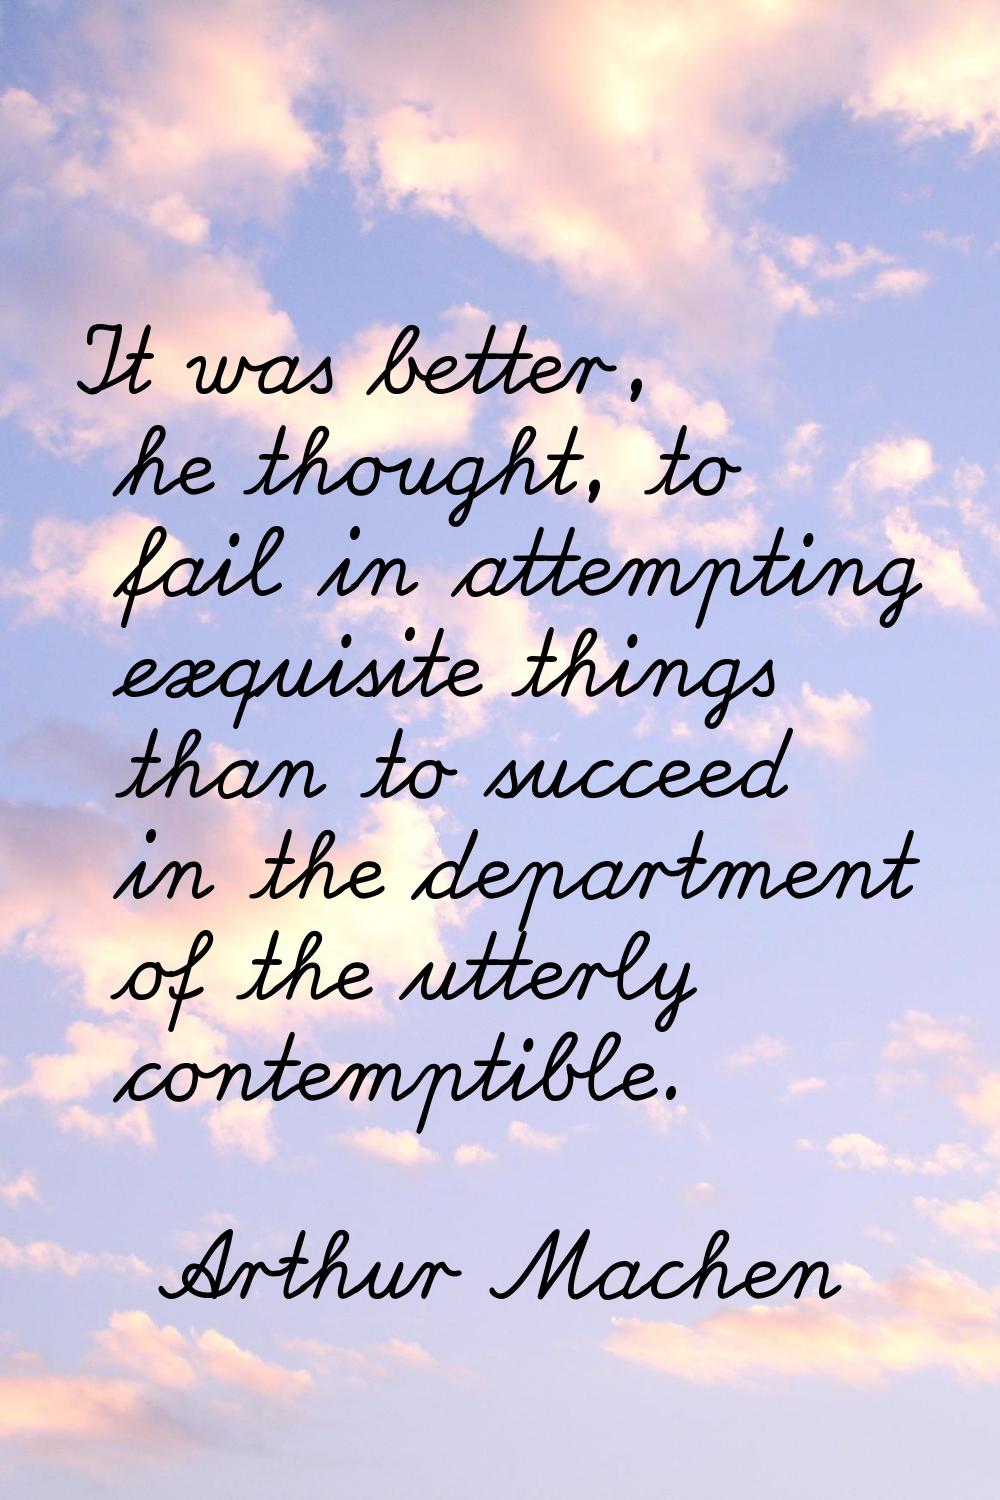 It was better, he thought, to fail in attempting exquisite things than to succeed in the department